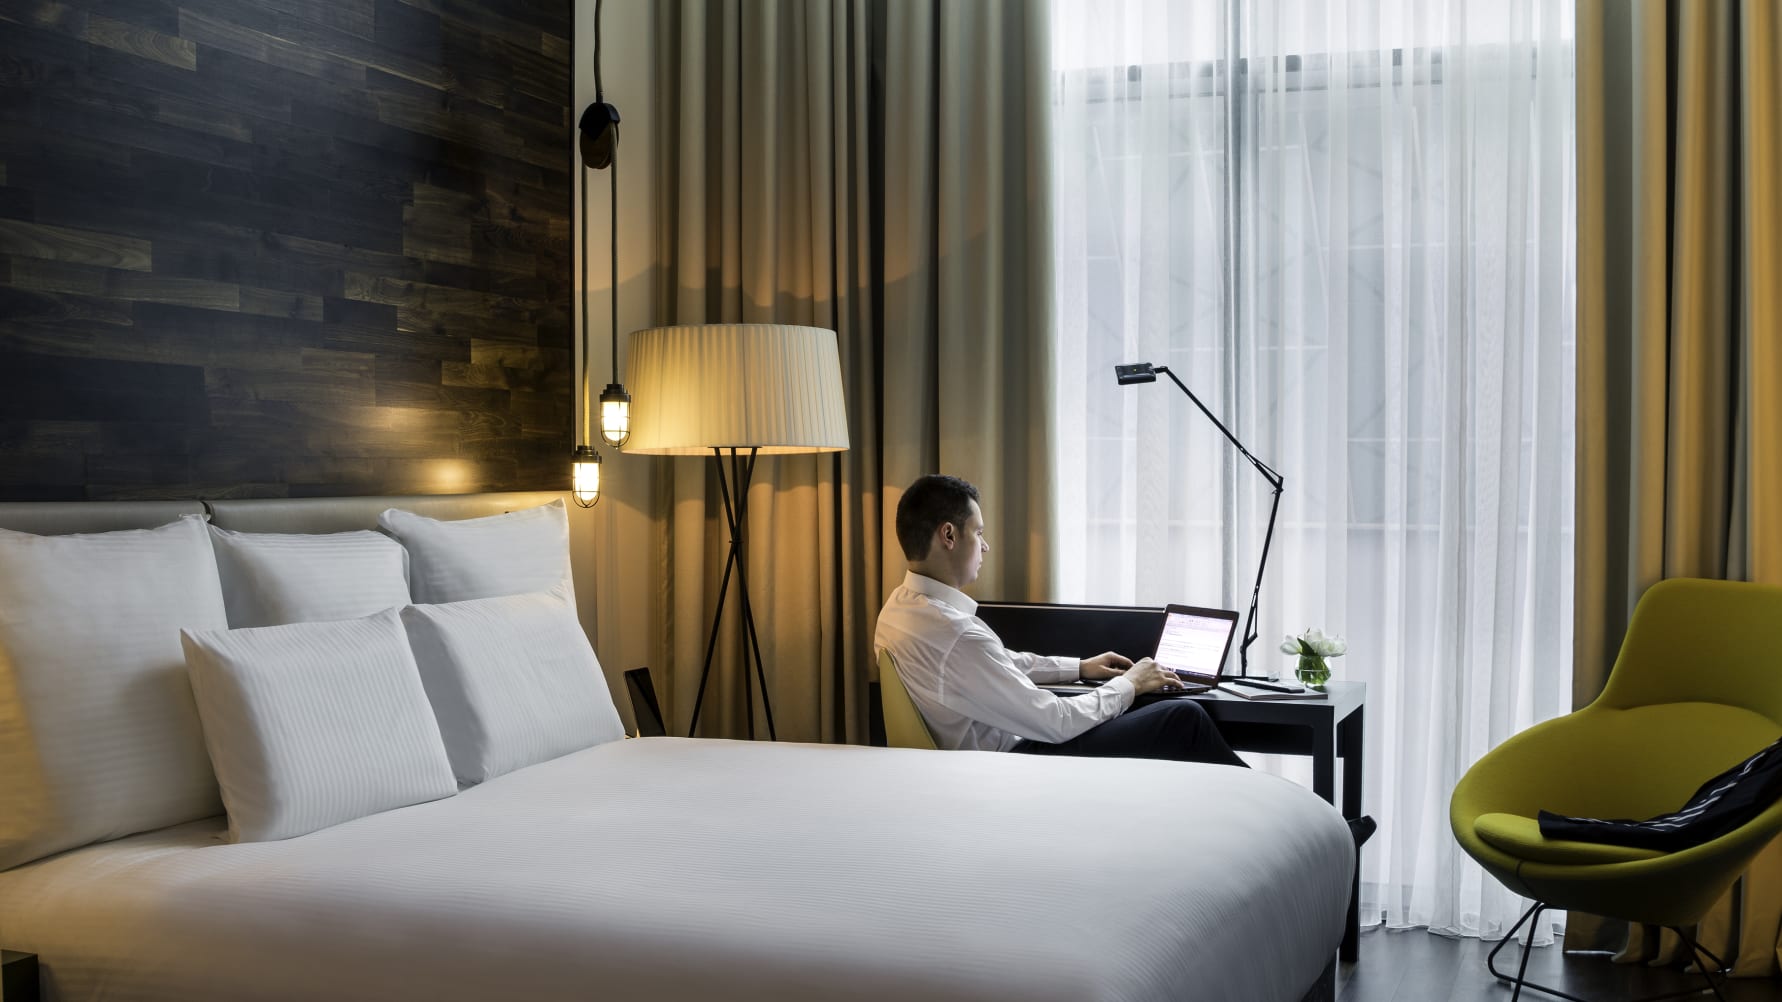 Remote-Working-Upgrade: Accor launcht „Hotel Office“